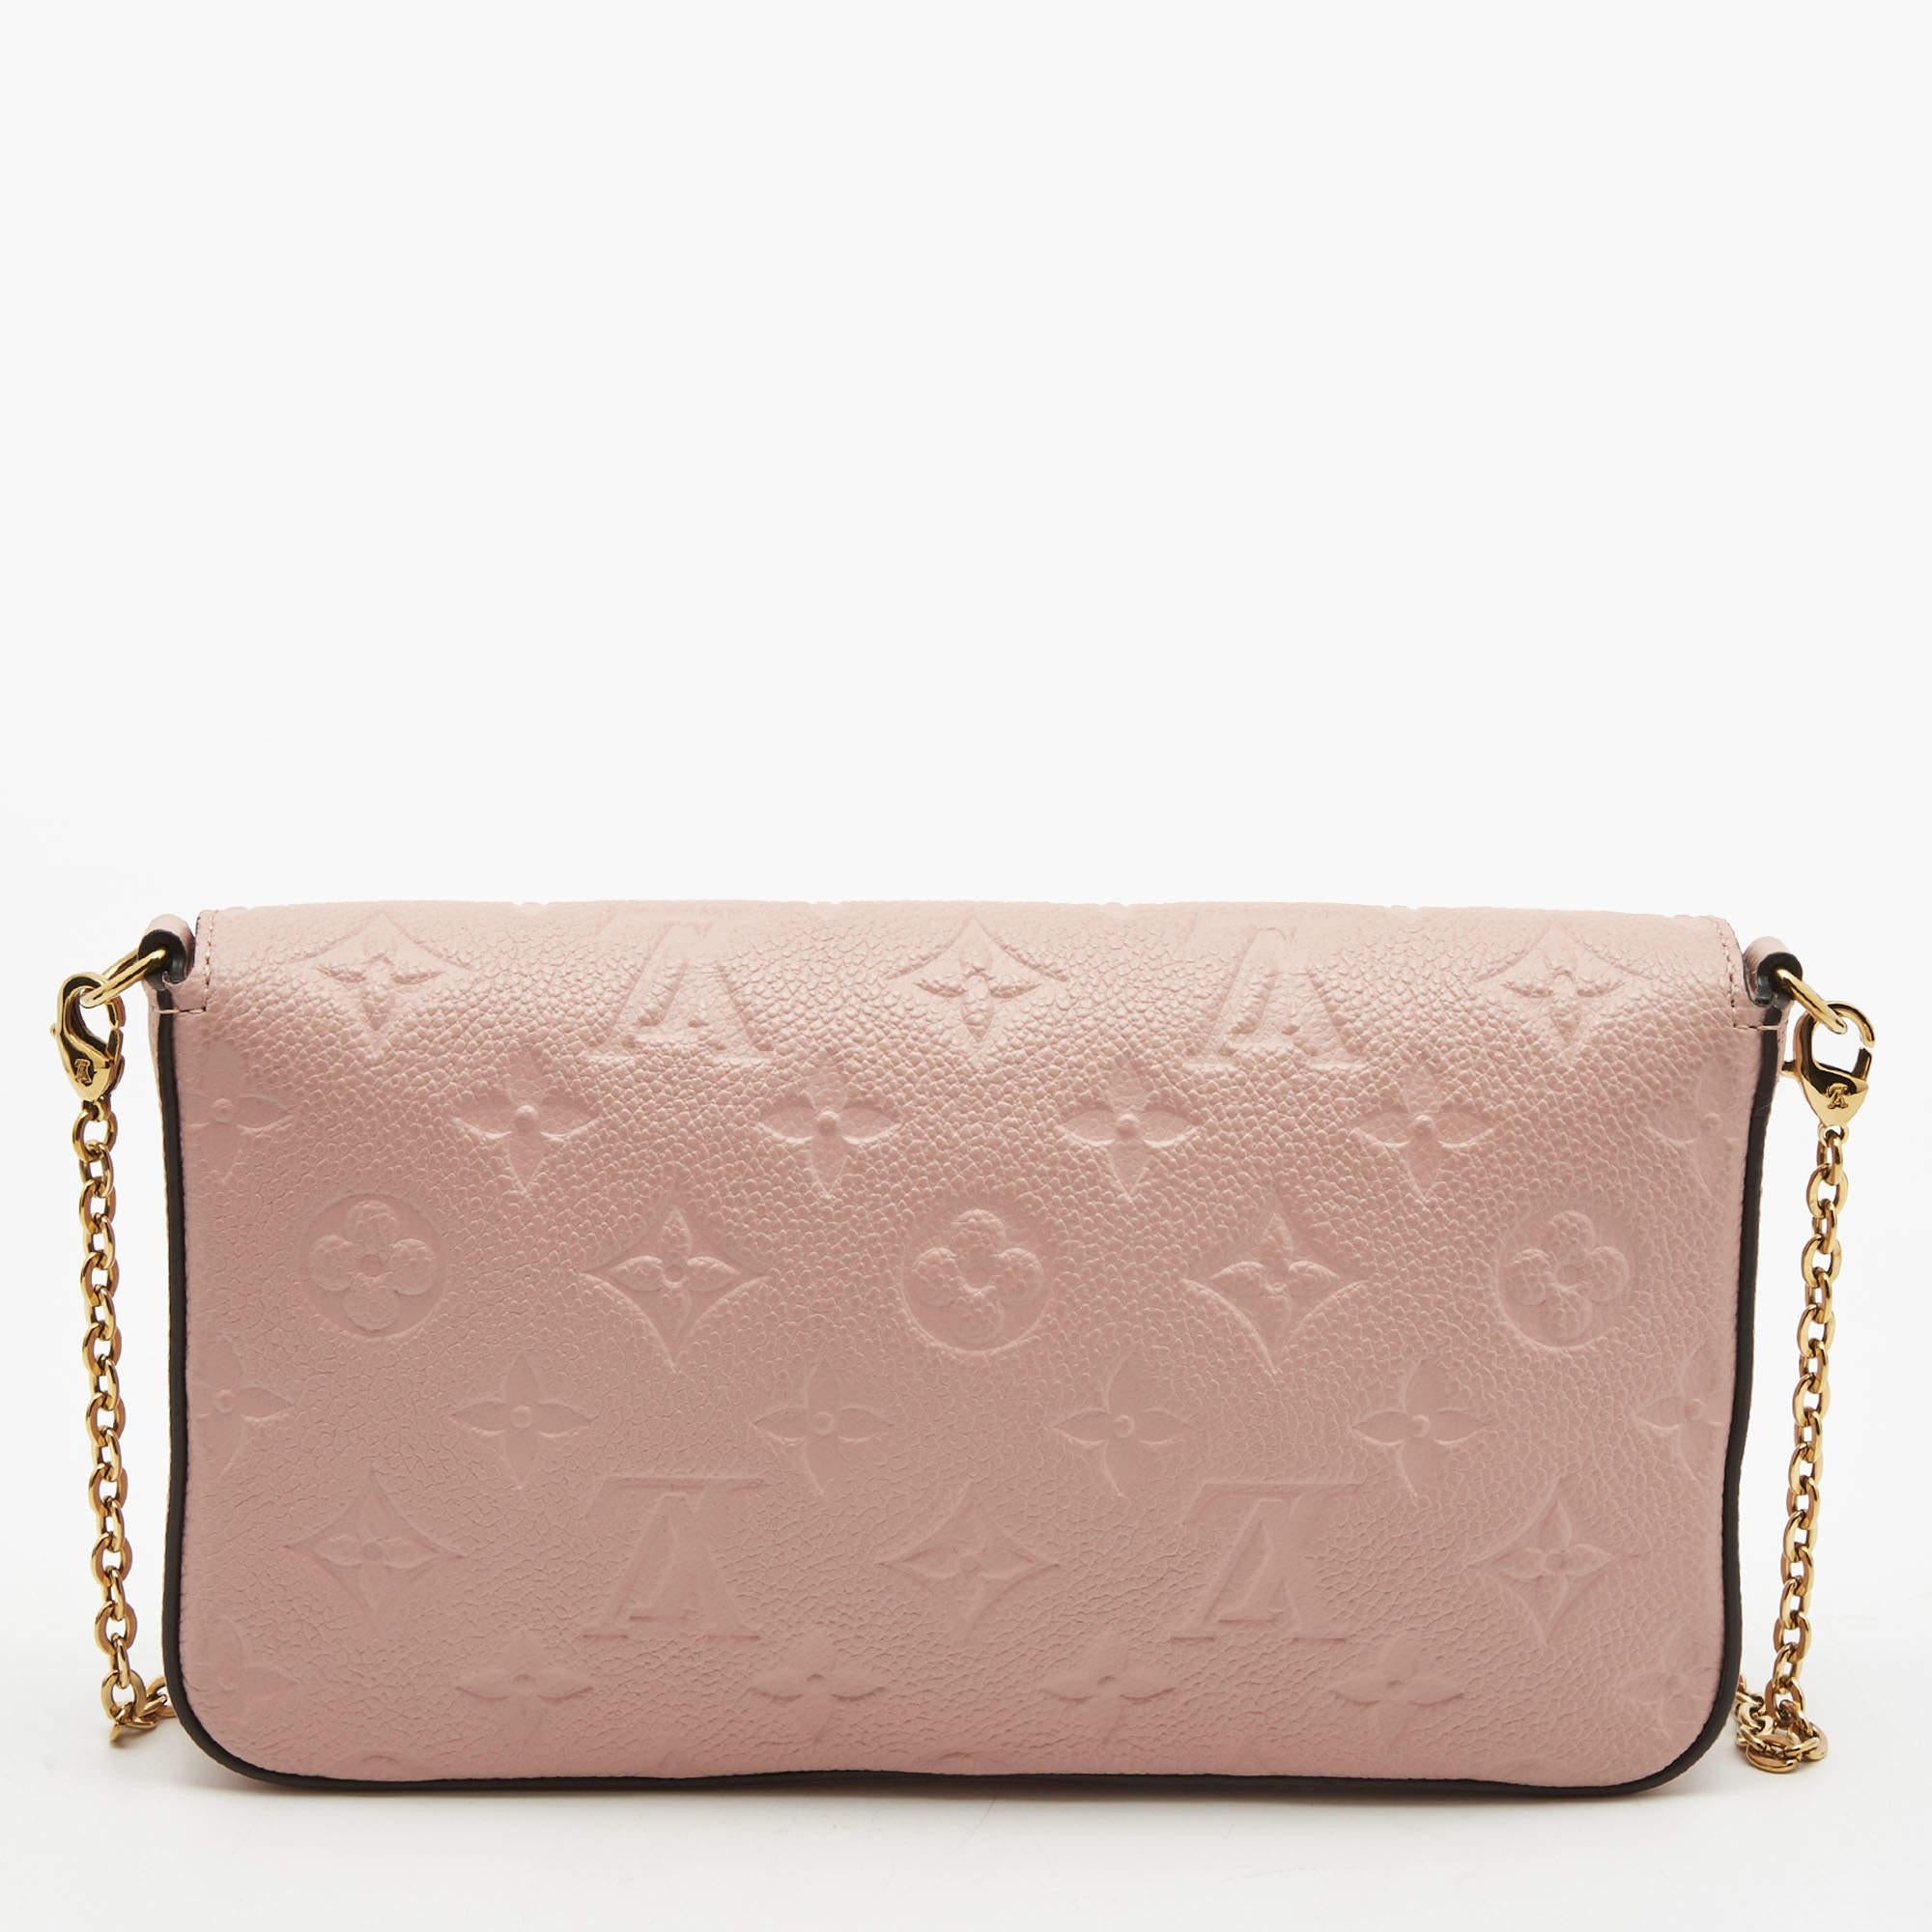 This Pochette Félicie has been designed to be a shoulder bag as well as a clutch. It is crafted from Rose Poudre Monogram Empreinte leather and has an Alcantara-lined interior, an envelope flap, and a silver-tone chain. The bag comes in a convenient